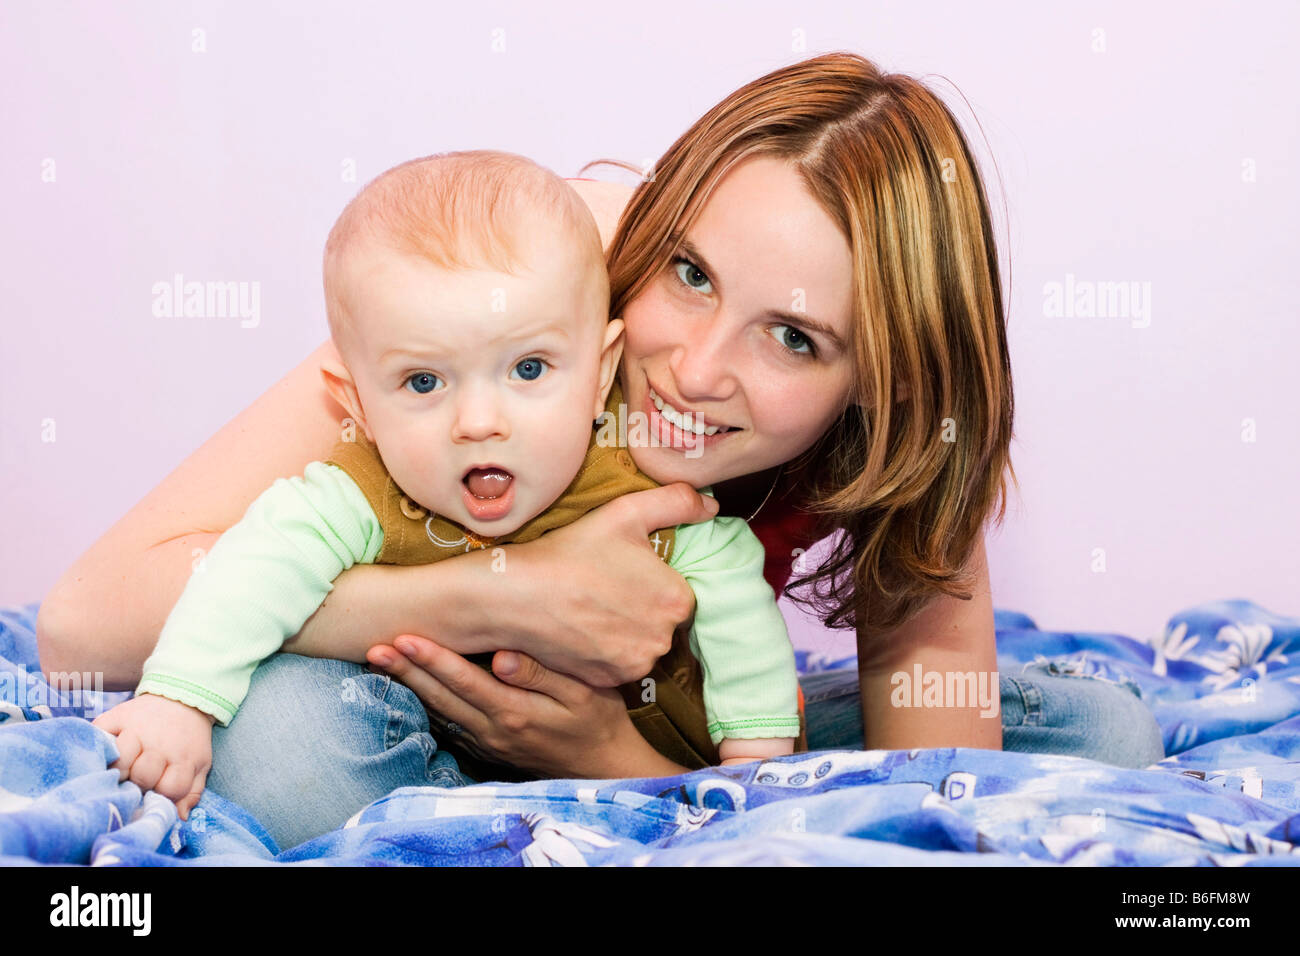 Smiling young mother, 25 years old, and her son, 7 months old Stock Photo